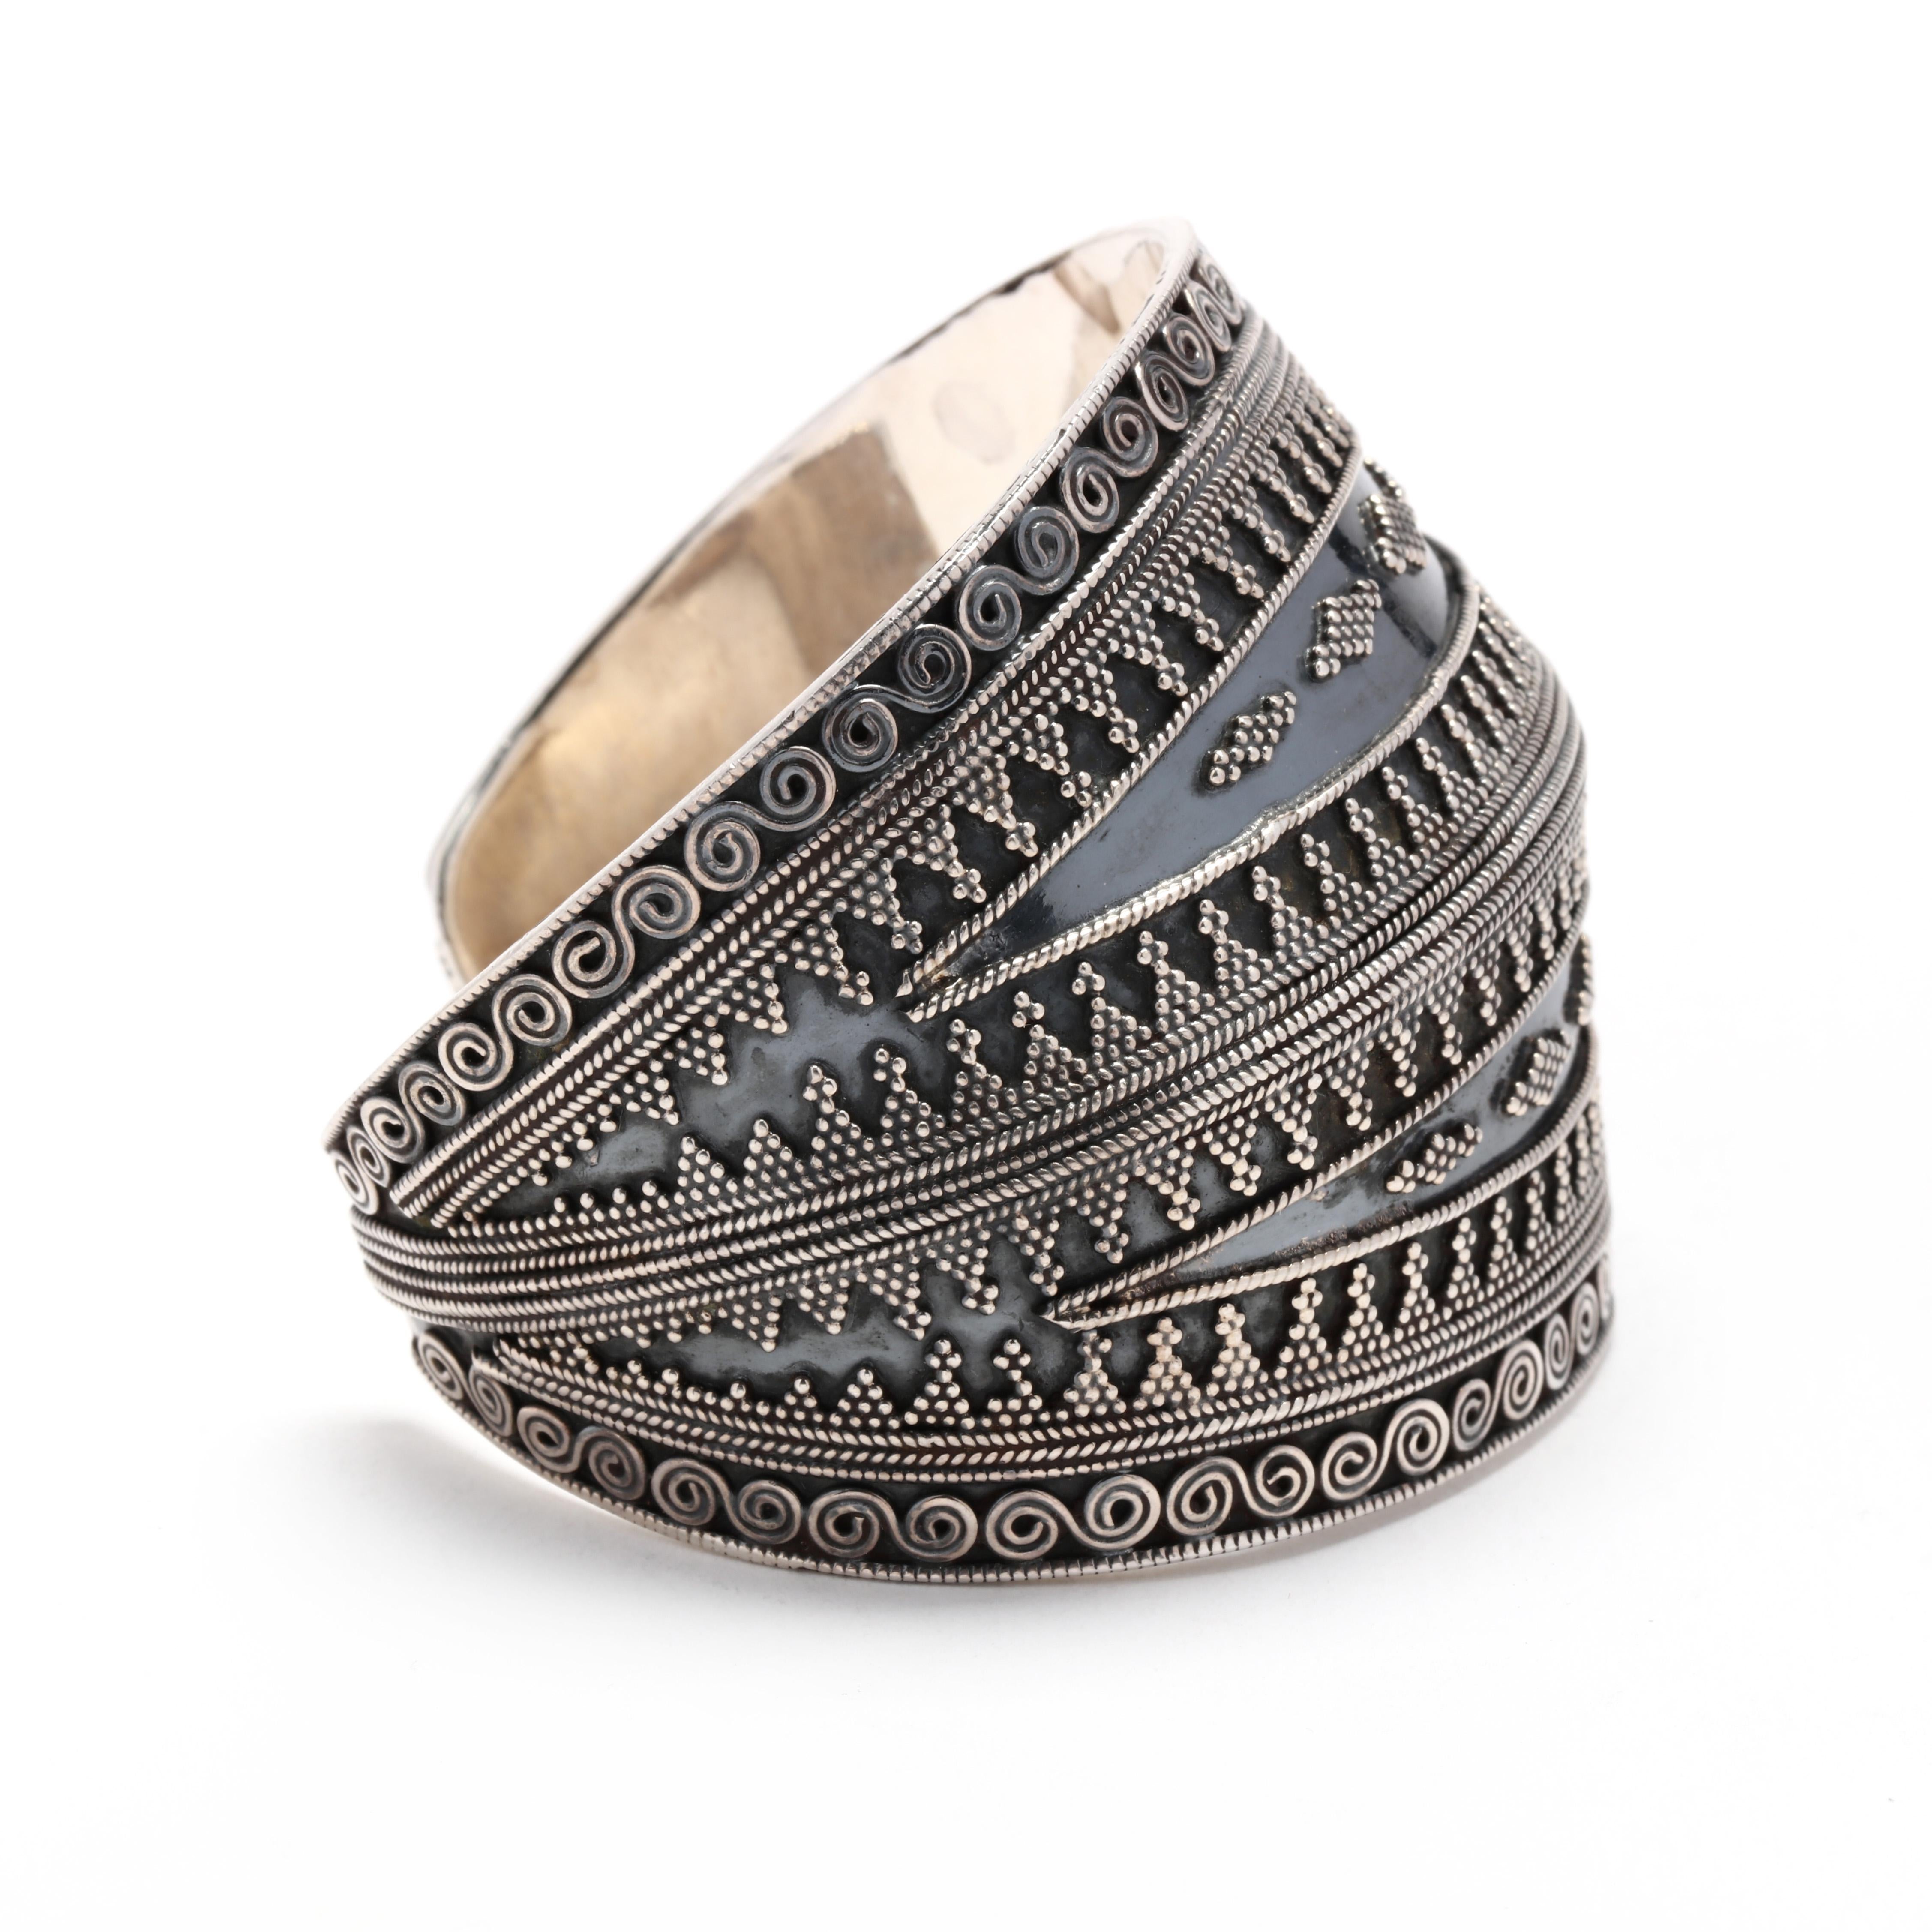 A sterling silver wide beaded tribal cuff bracelet.  This bracelet features a tribal style applied motif with beaded and coiled decoration with a raised ridge to the center.   The wide front tapers to the back and it tests as silver.

Length: 6 1/2